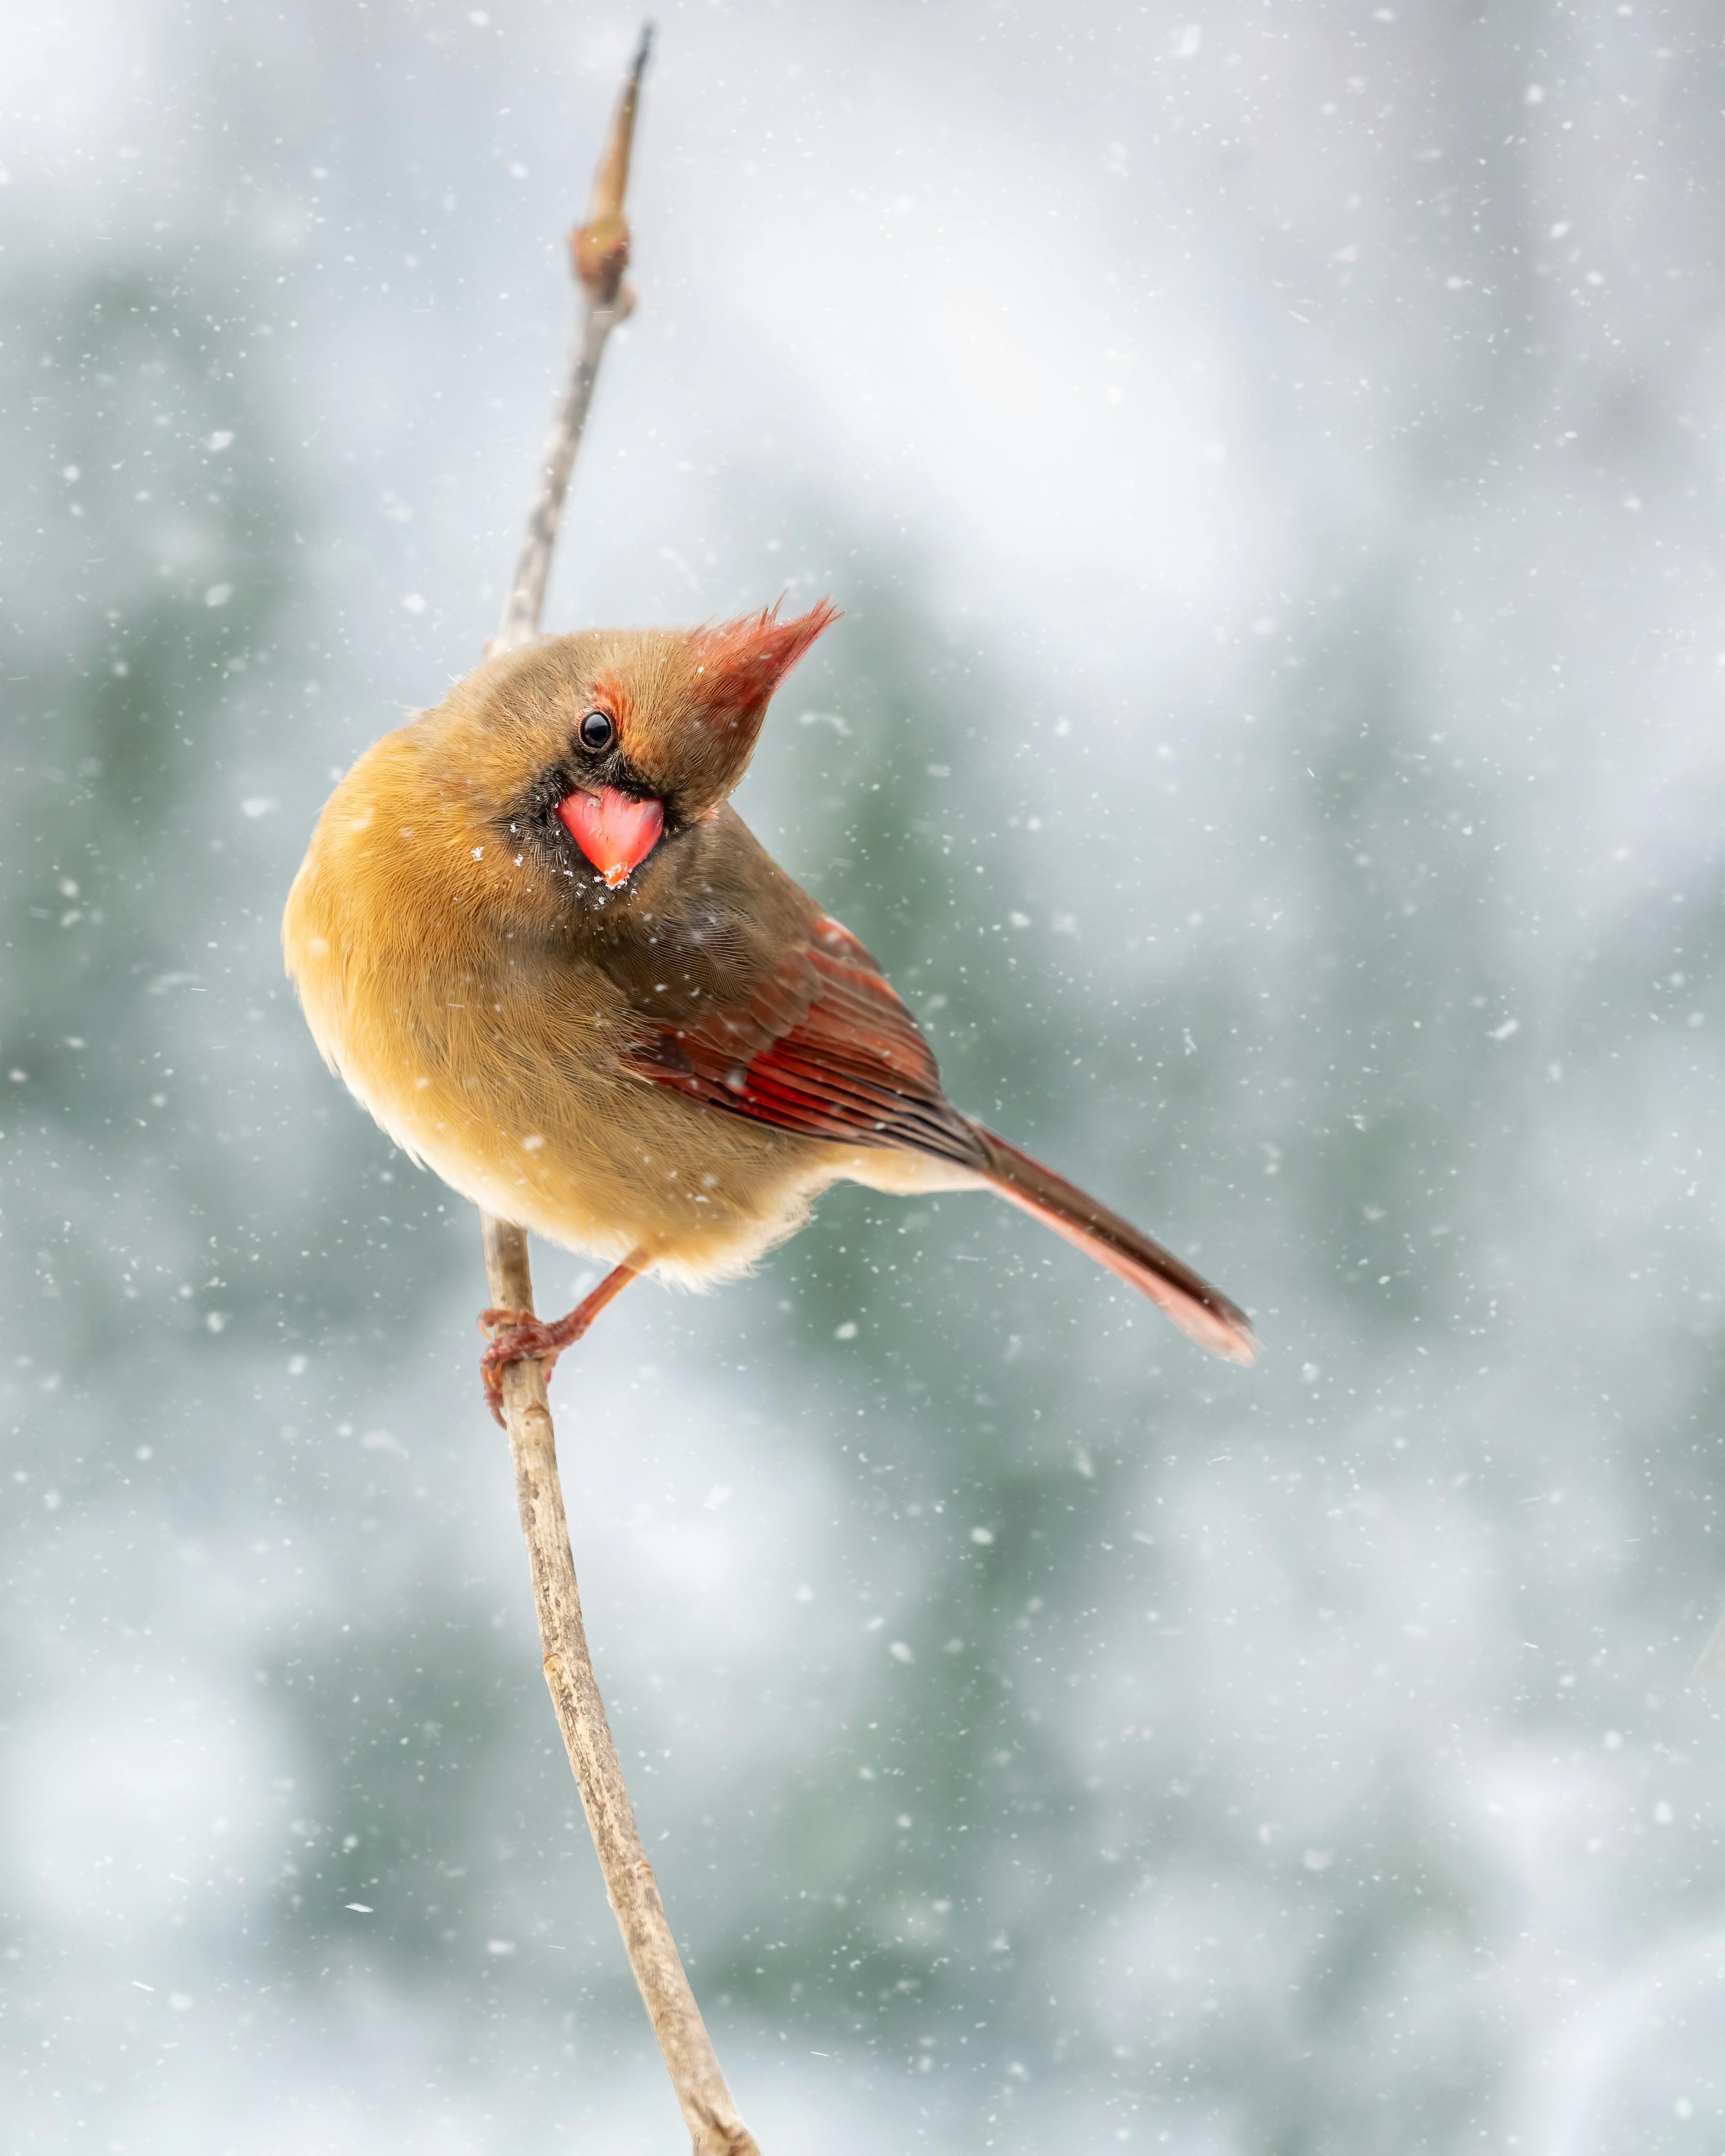 Image of Bird sitting on a branch in the snow free to use